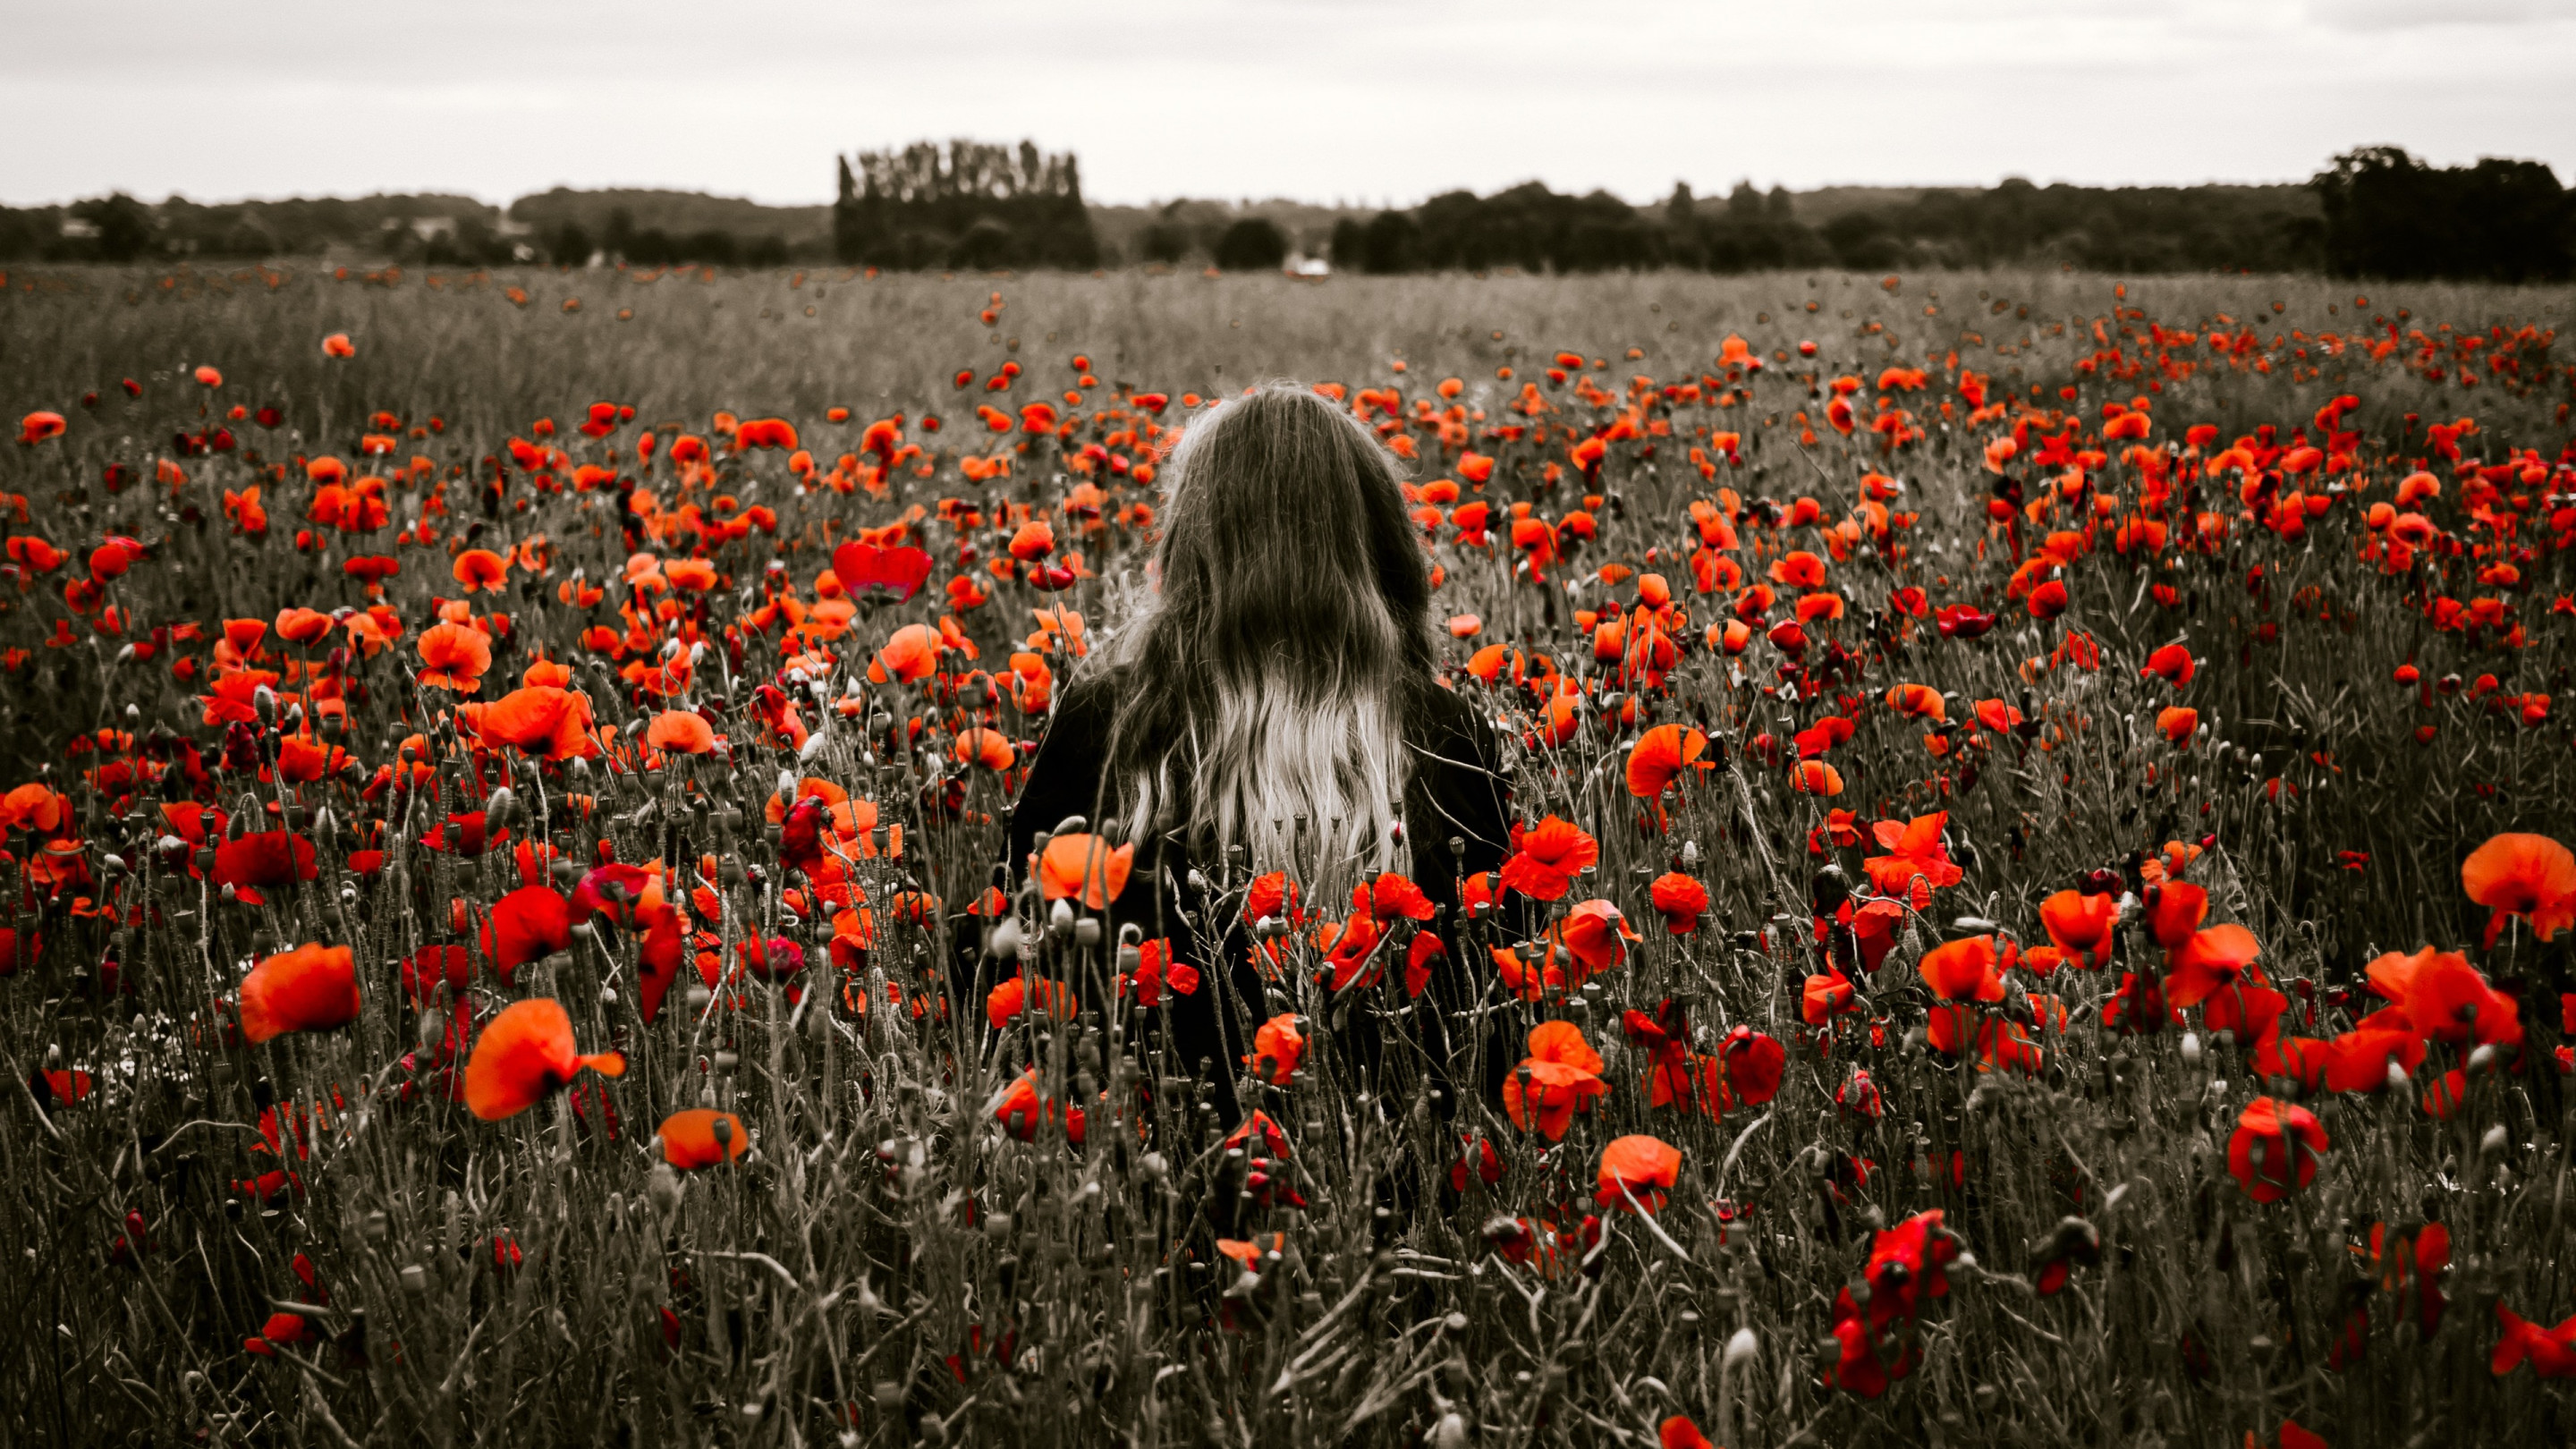 Girl in the field with red poppies wallpaper 2880x1620